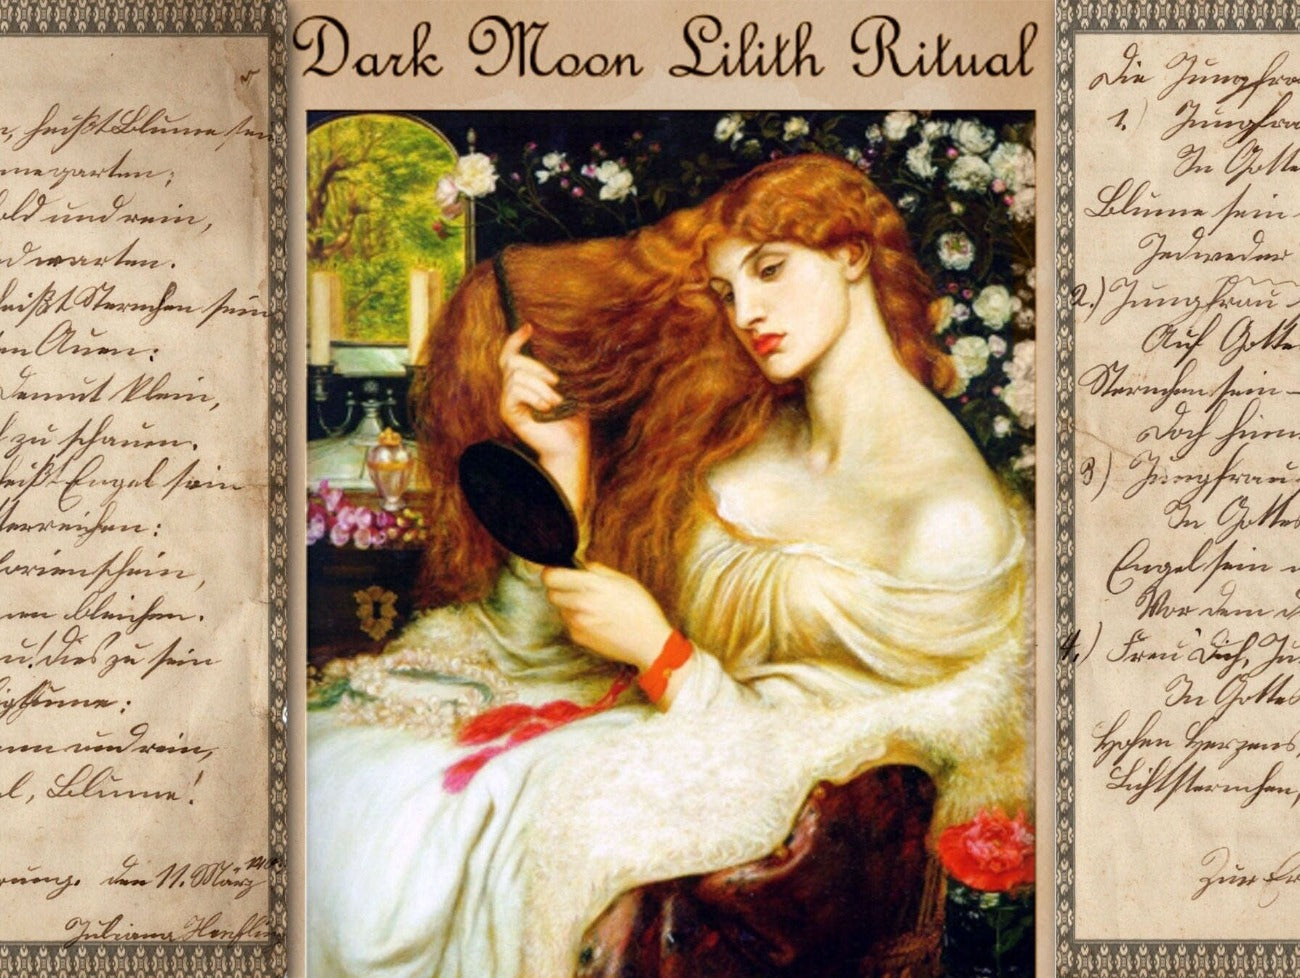 LILITH RITUAL 4 Printable Pages, Swimming Into the Deep, Light a black candle and meet Lilith, Let her fierce energy empower you- Morgana Magick Spell